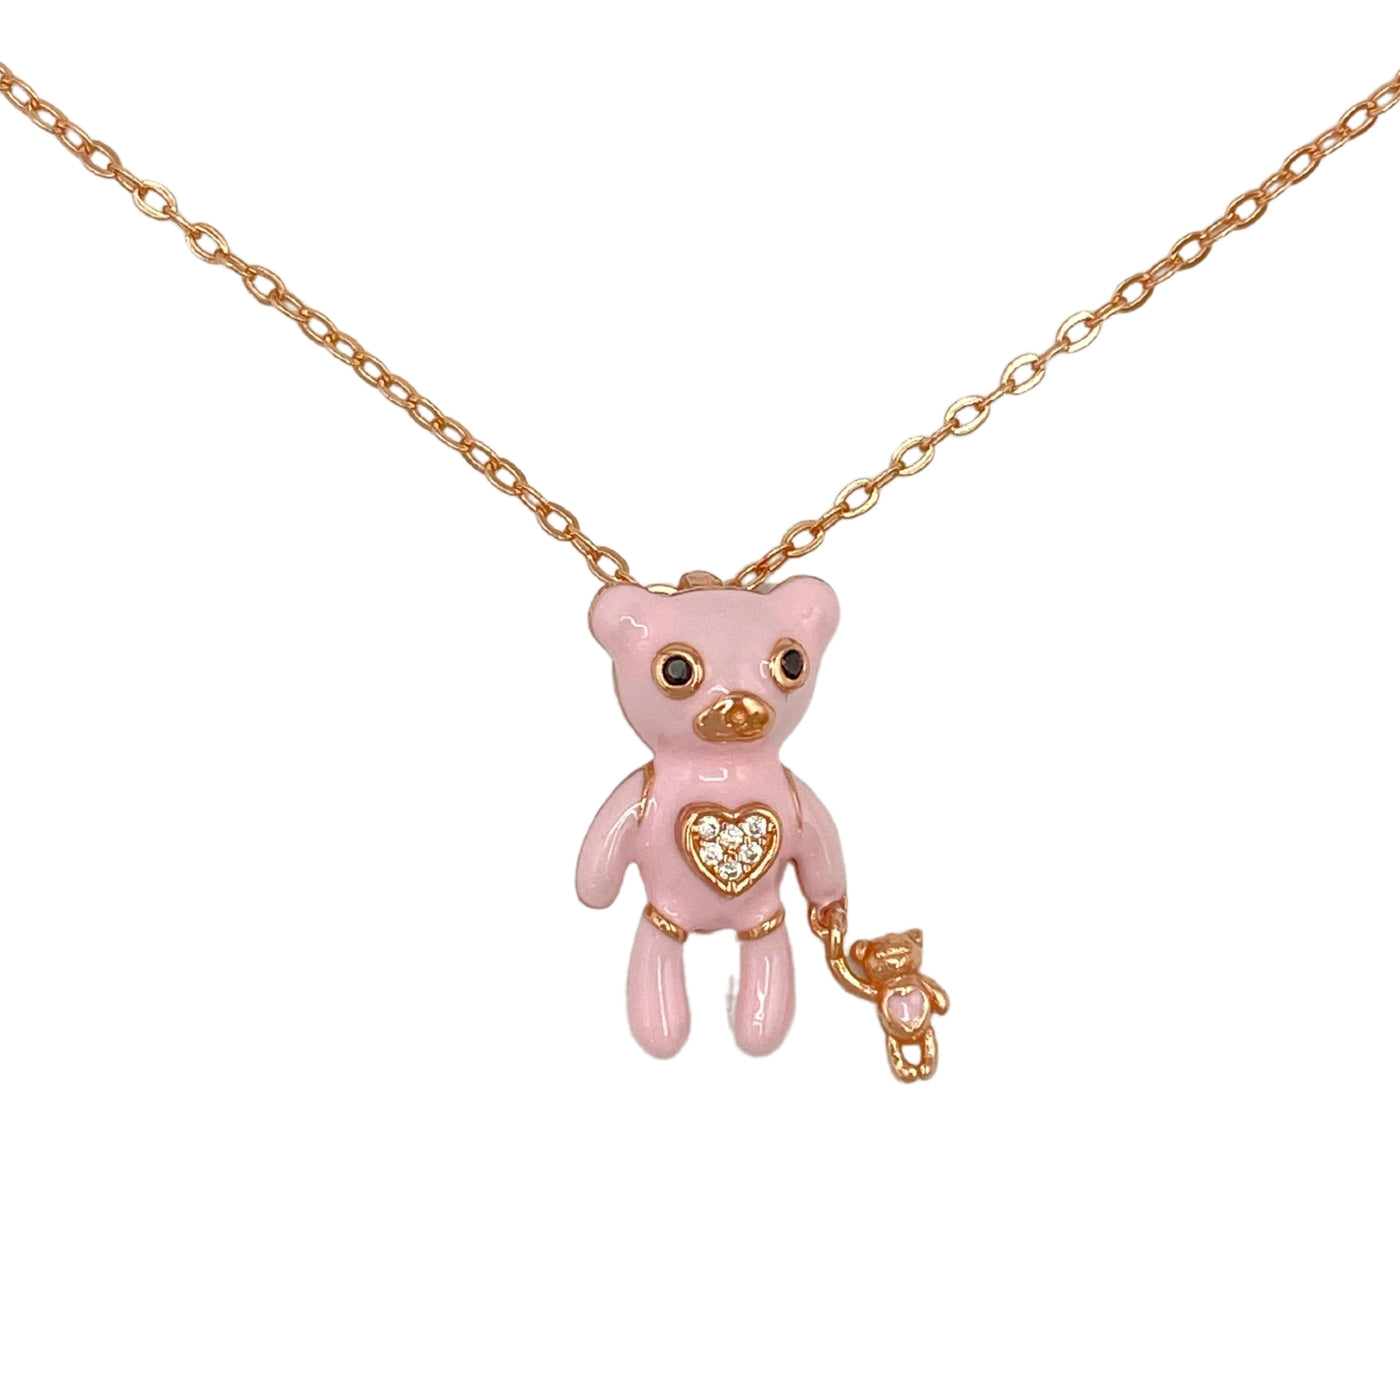 Silver necklace with enamel bear charm